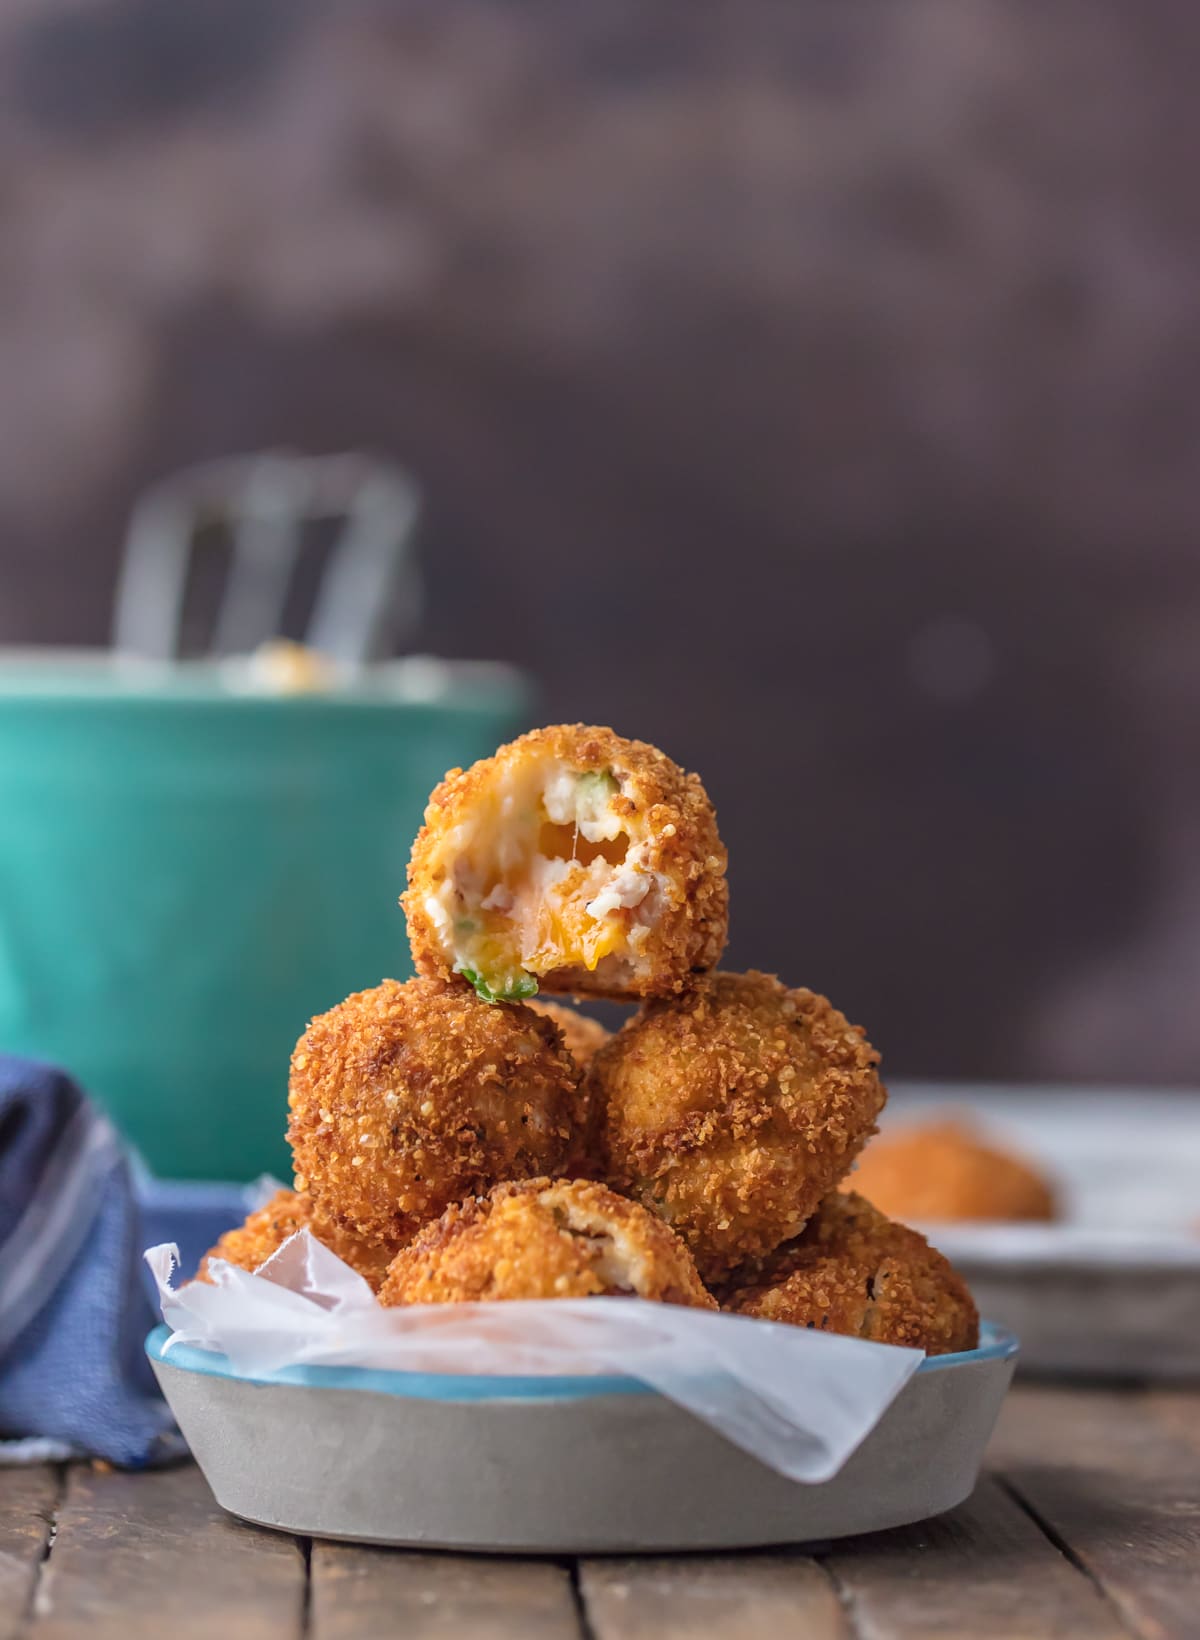 DEEP FRIED LOADED MASHED POTATO BITES loaded with bacon, cheese, and onions are perfect for Thanksgiving leftovers! Put those leftover mashed potatoes to good use and fry them! The ultimate appetizer or side dish!